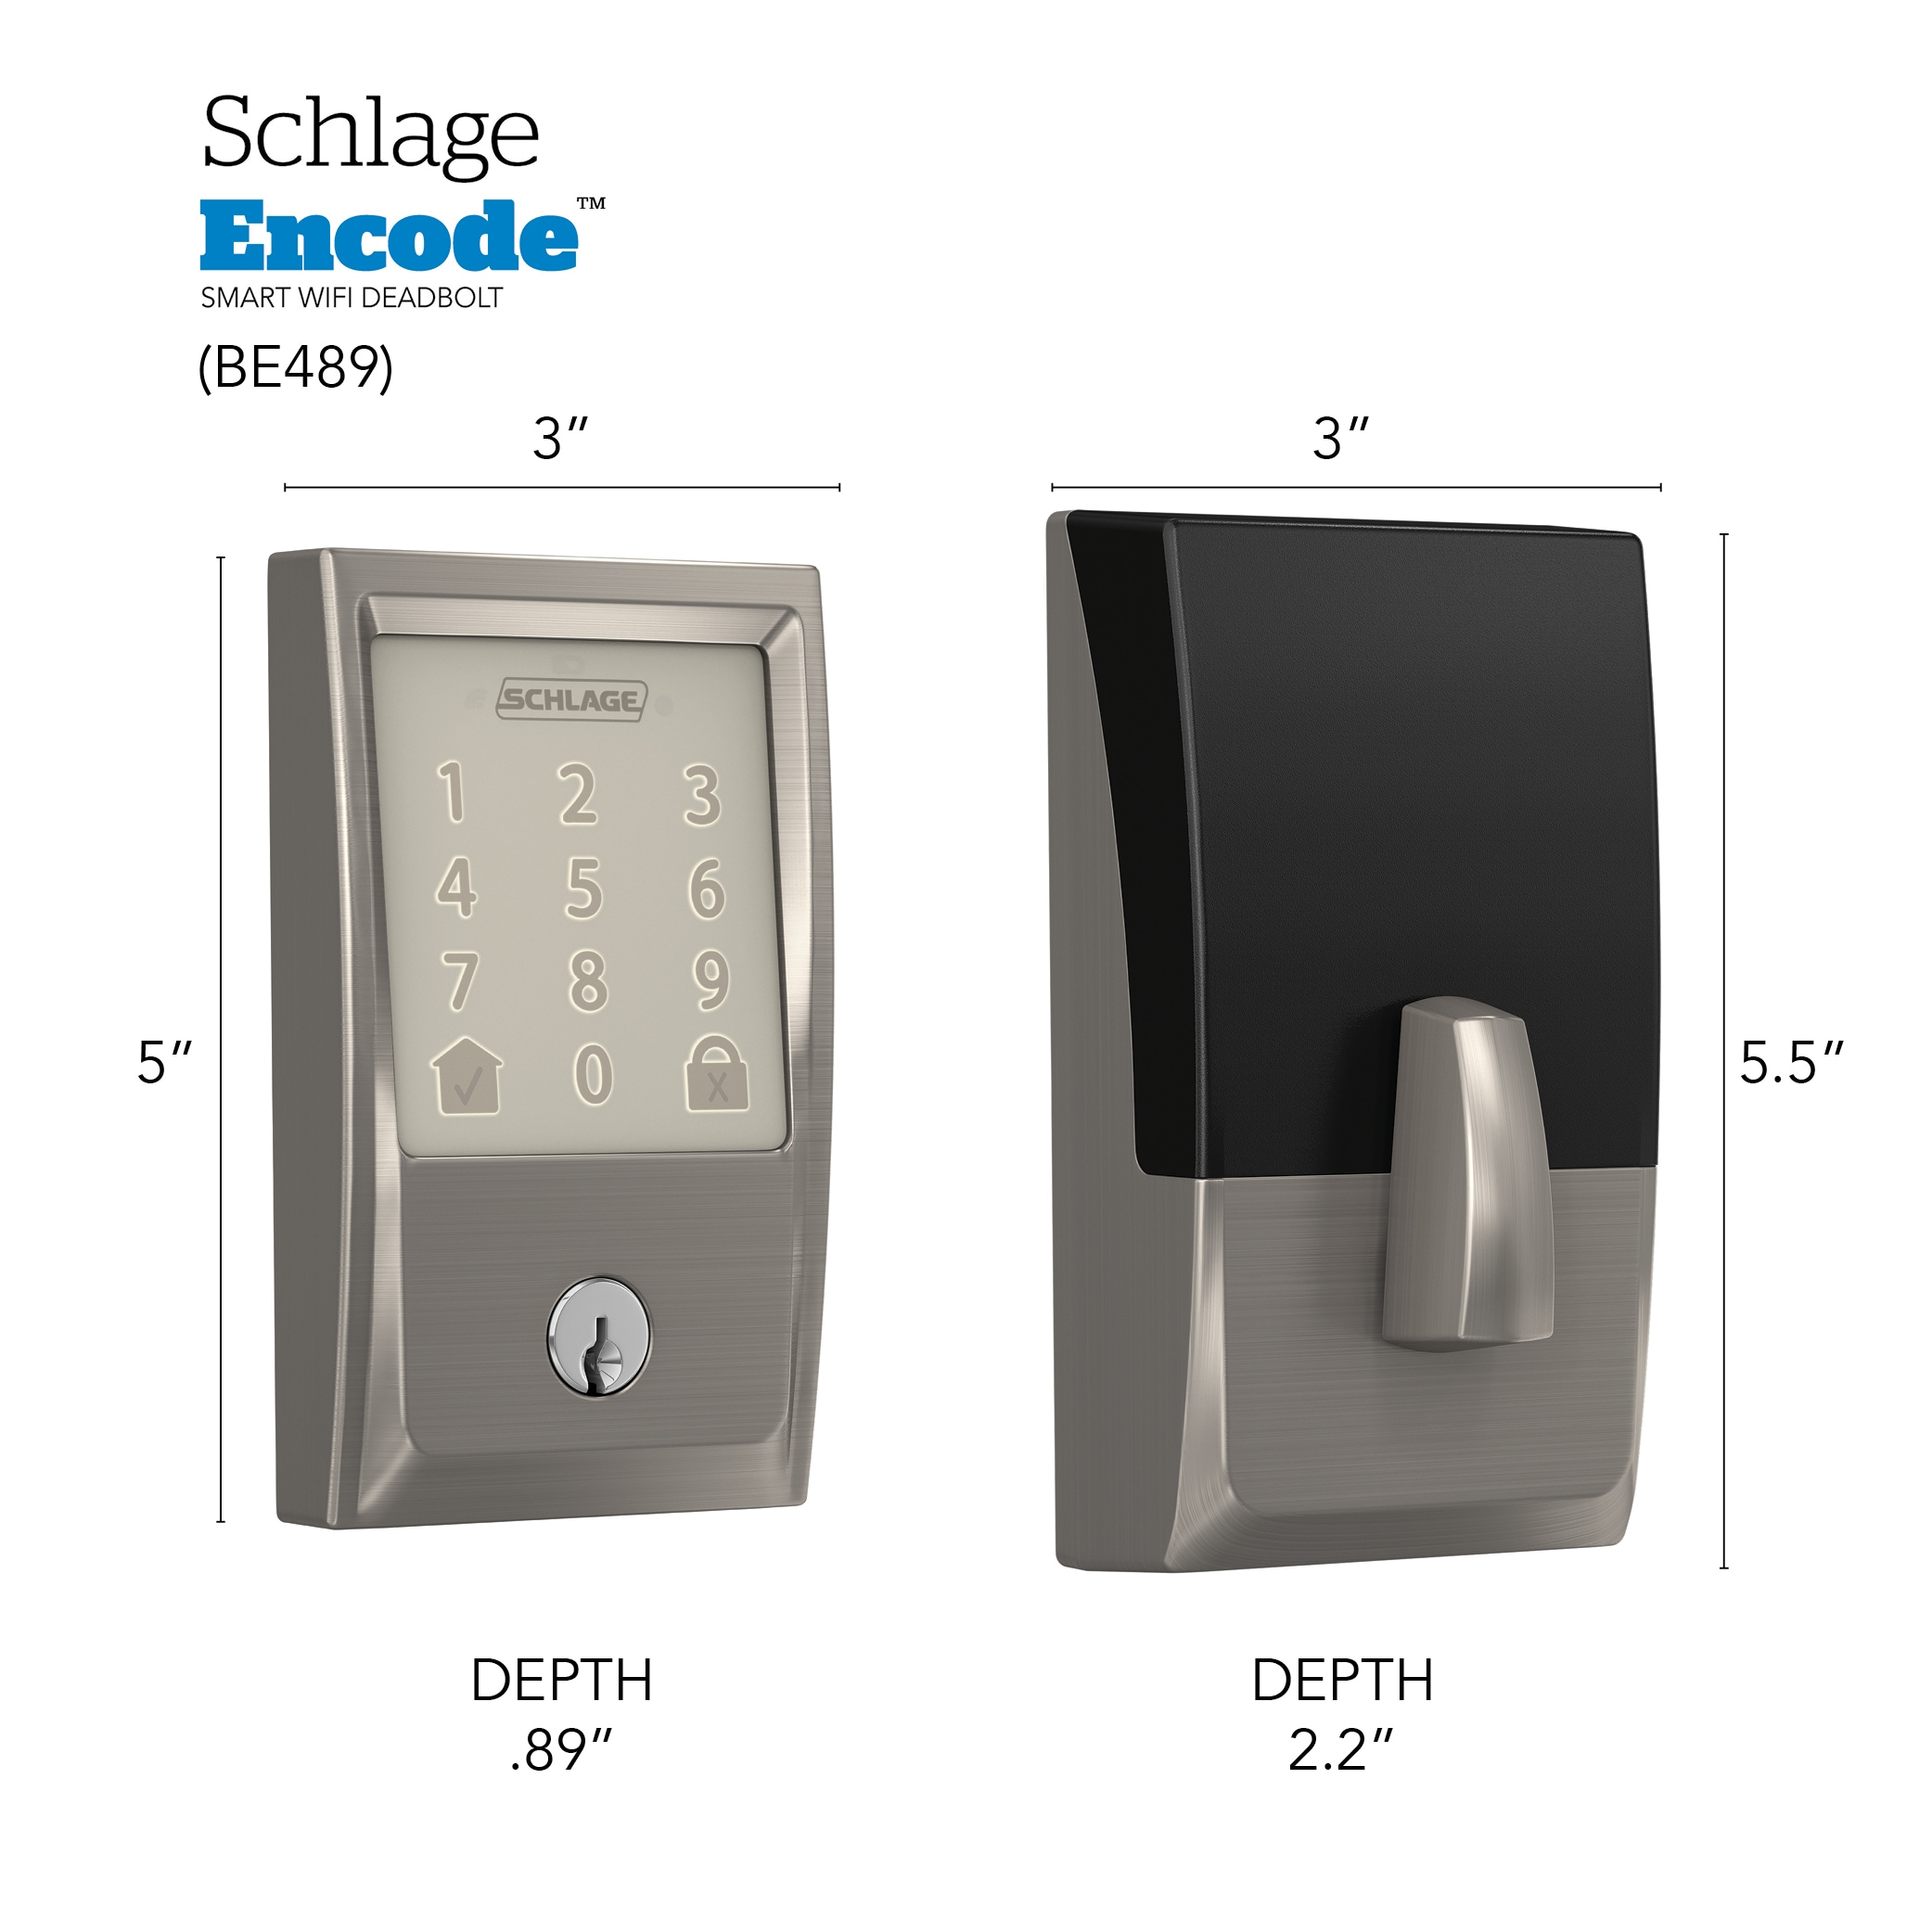 Schlage Extra Heavy Duty Deadlatch Great For Access Control Systems